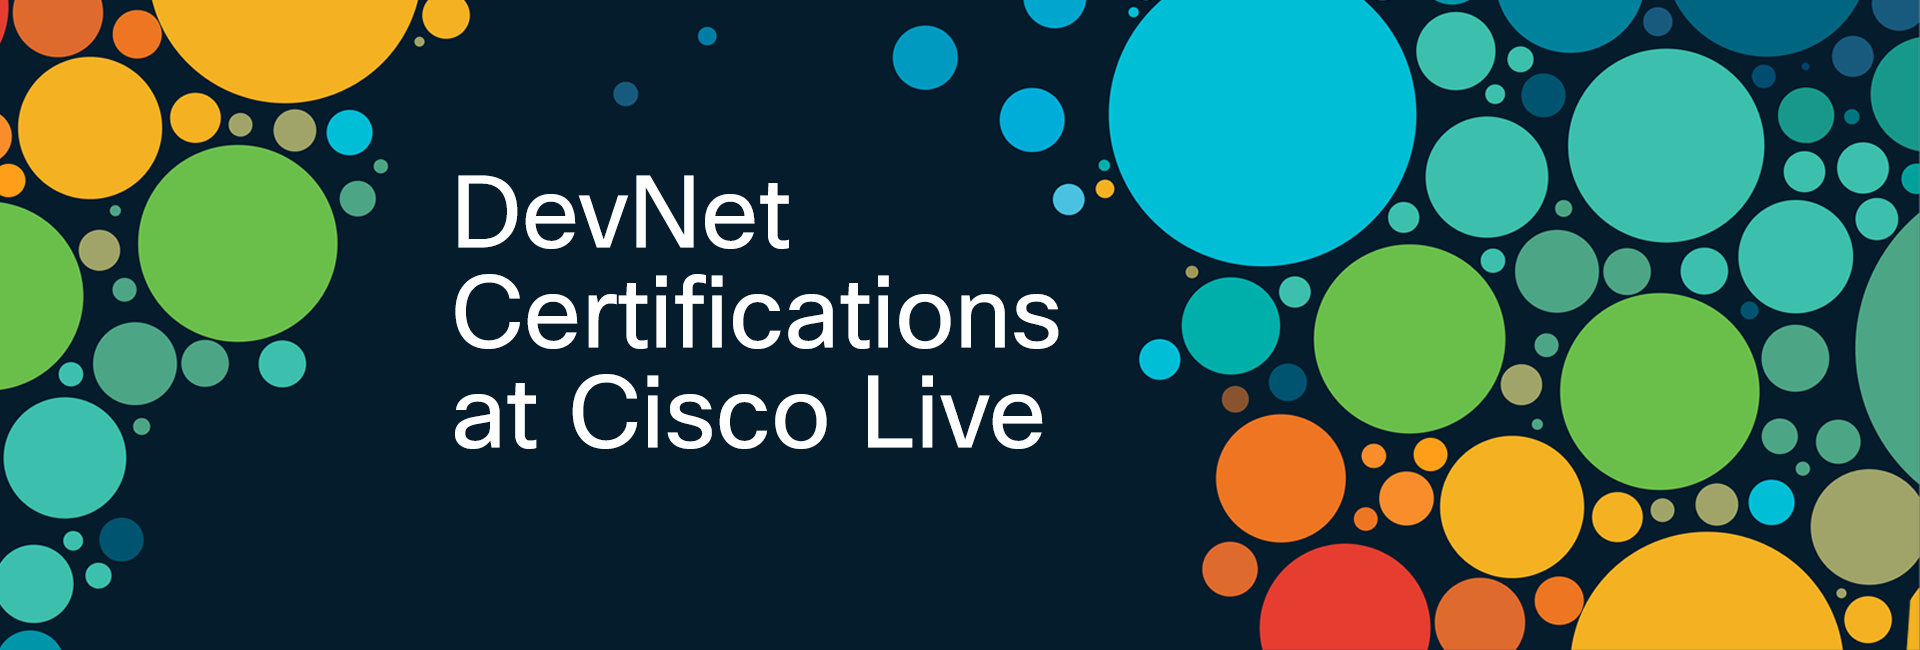 Reaching Your Personal Peak at Cisco Live and Beyond